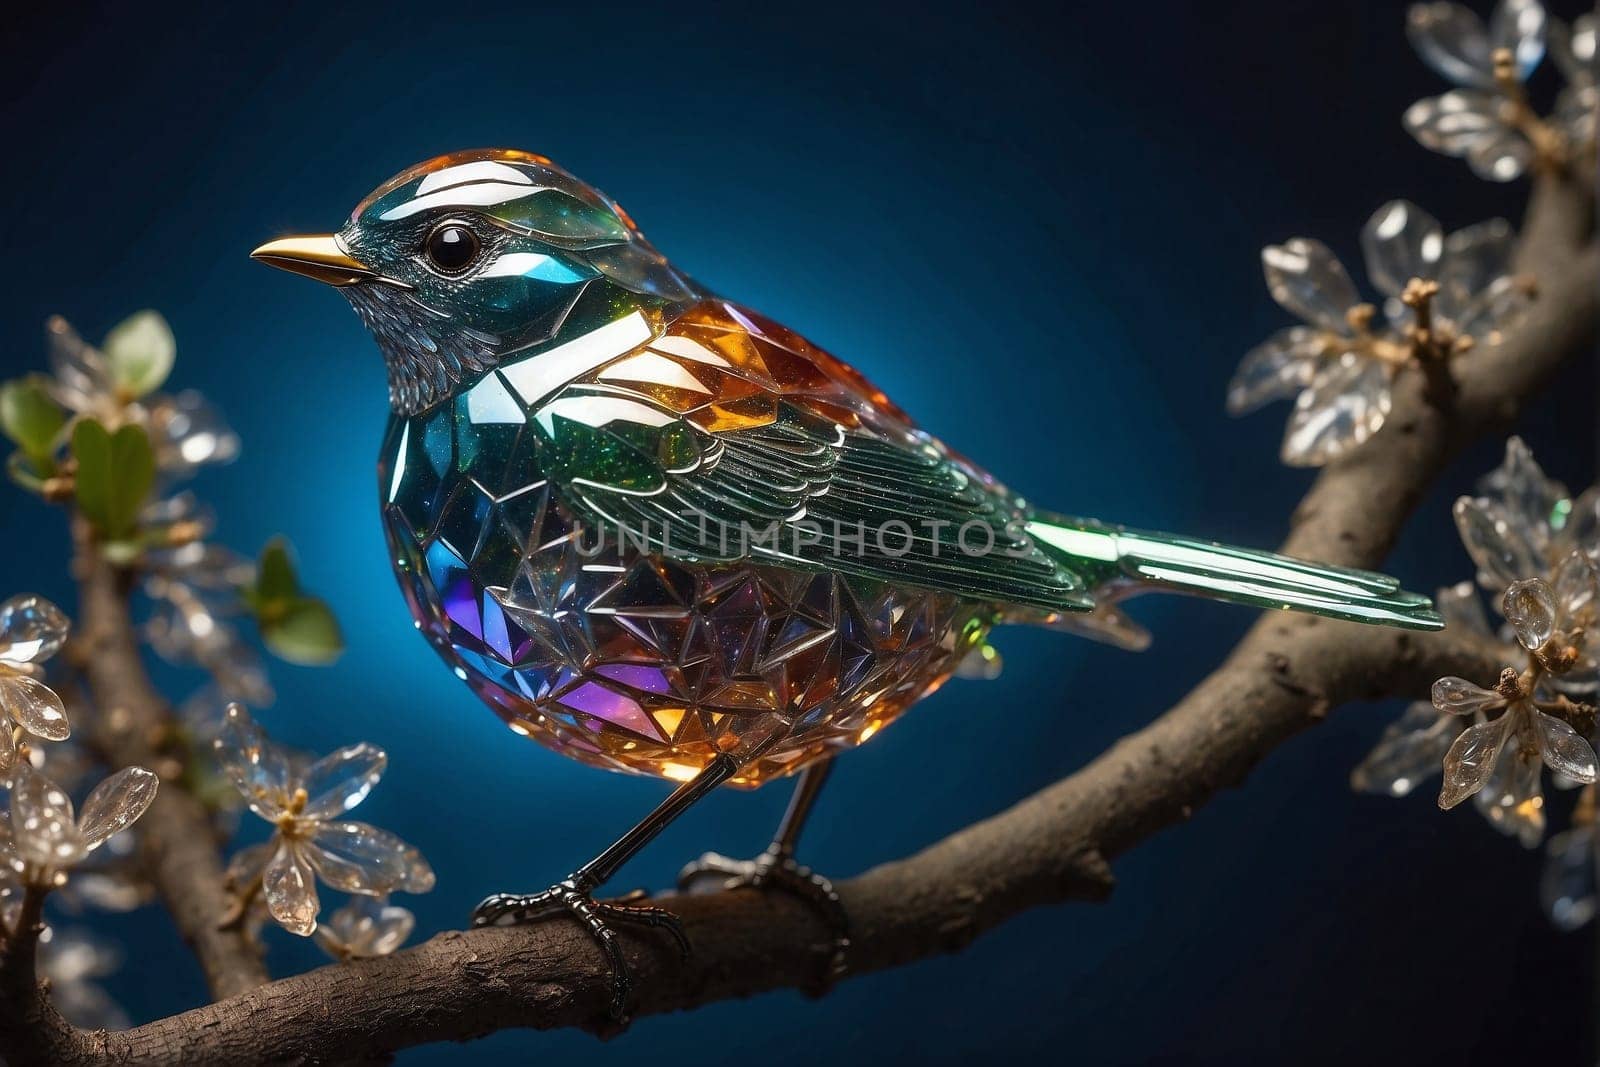 A stunning, vibrant bird displaying an array of colors perched gracefully on a branch of a tree.